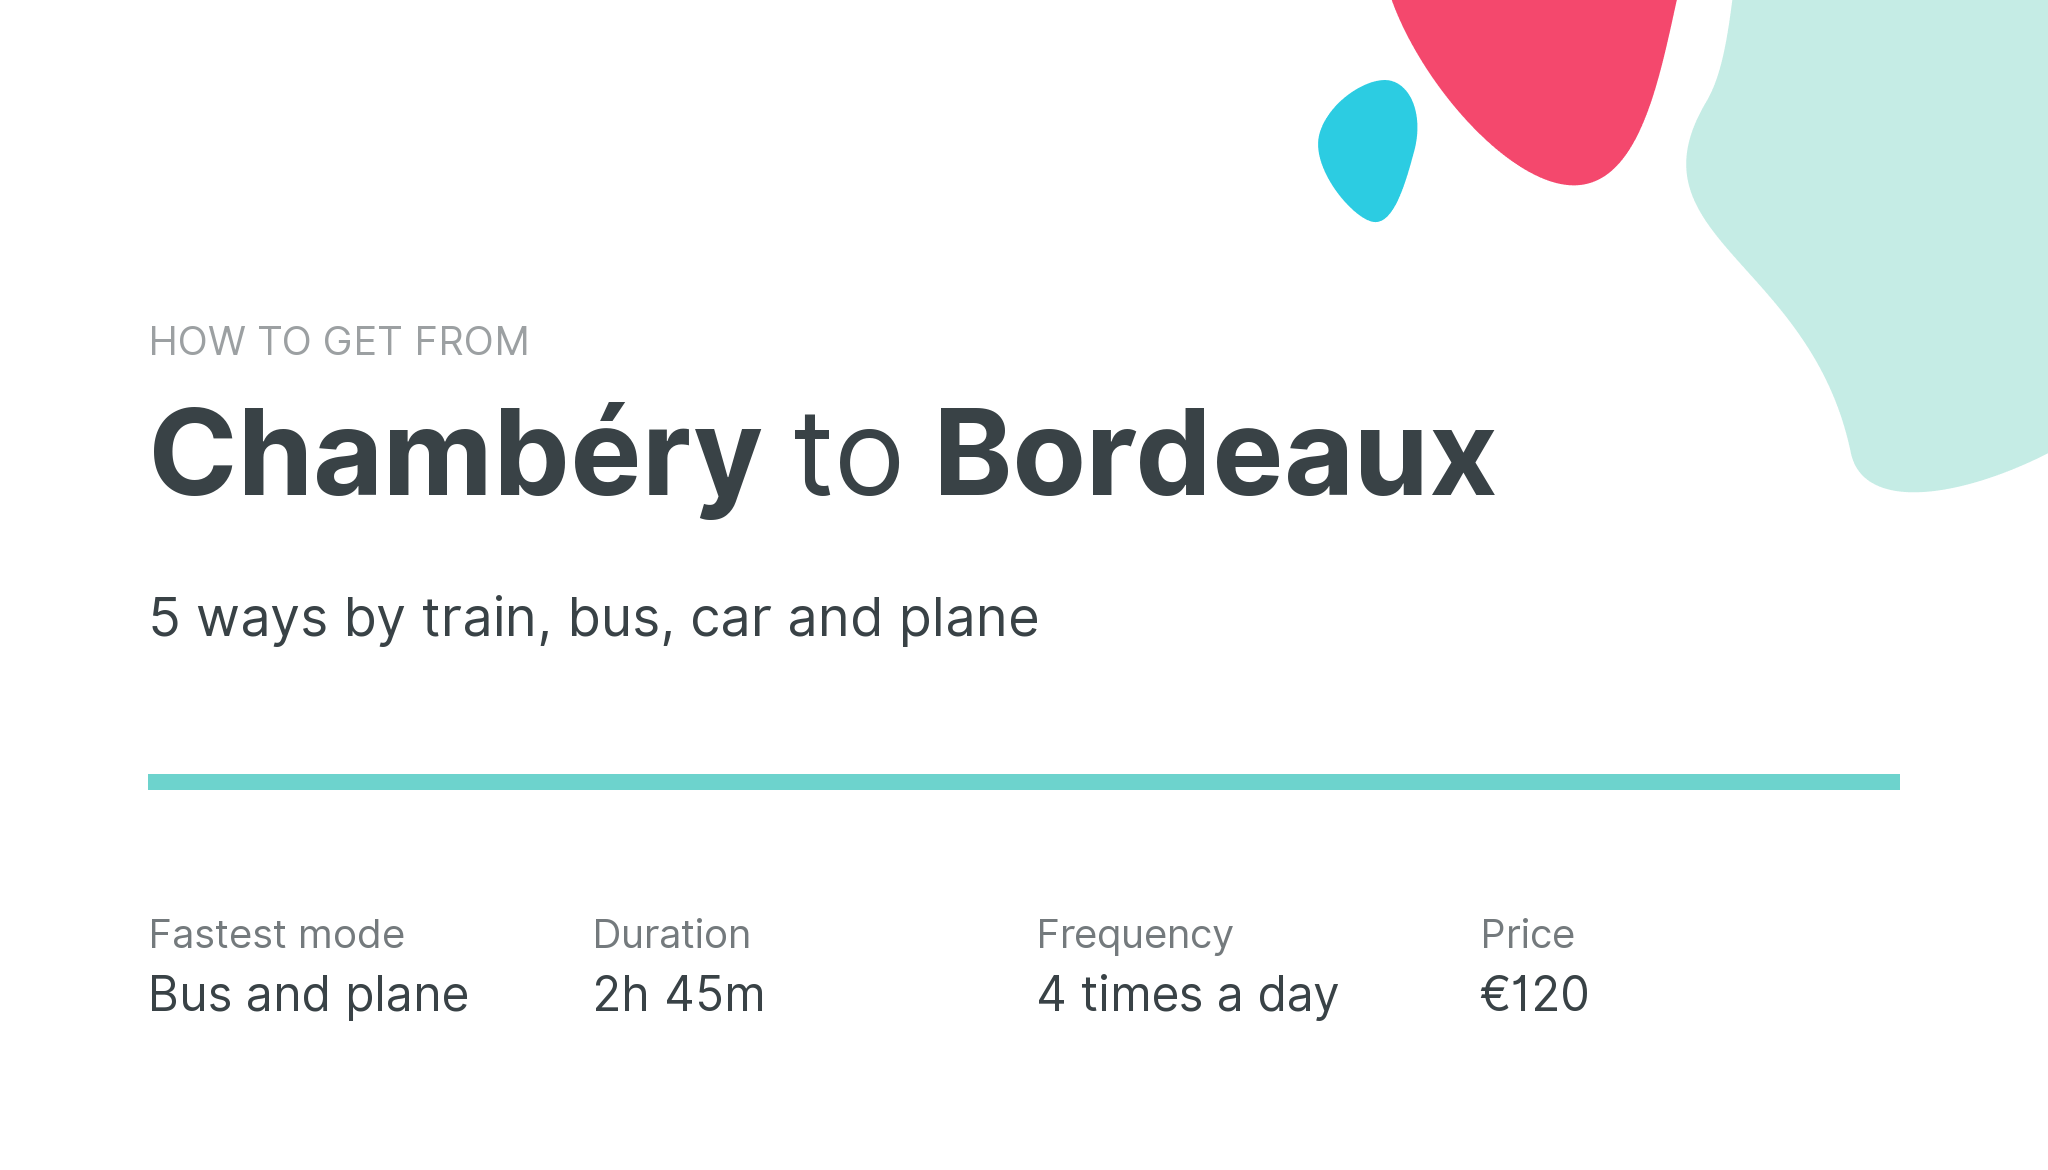 How do I get from Chambéry to Bordeaux